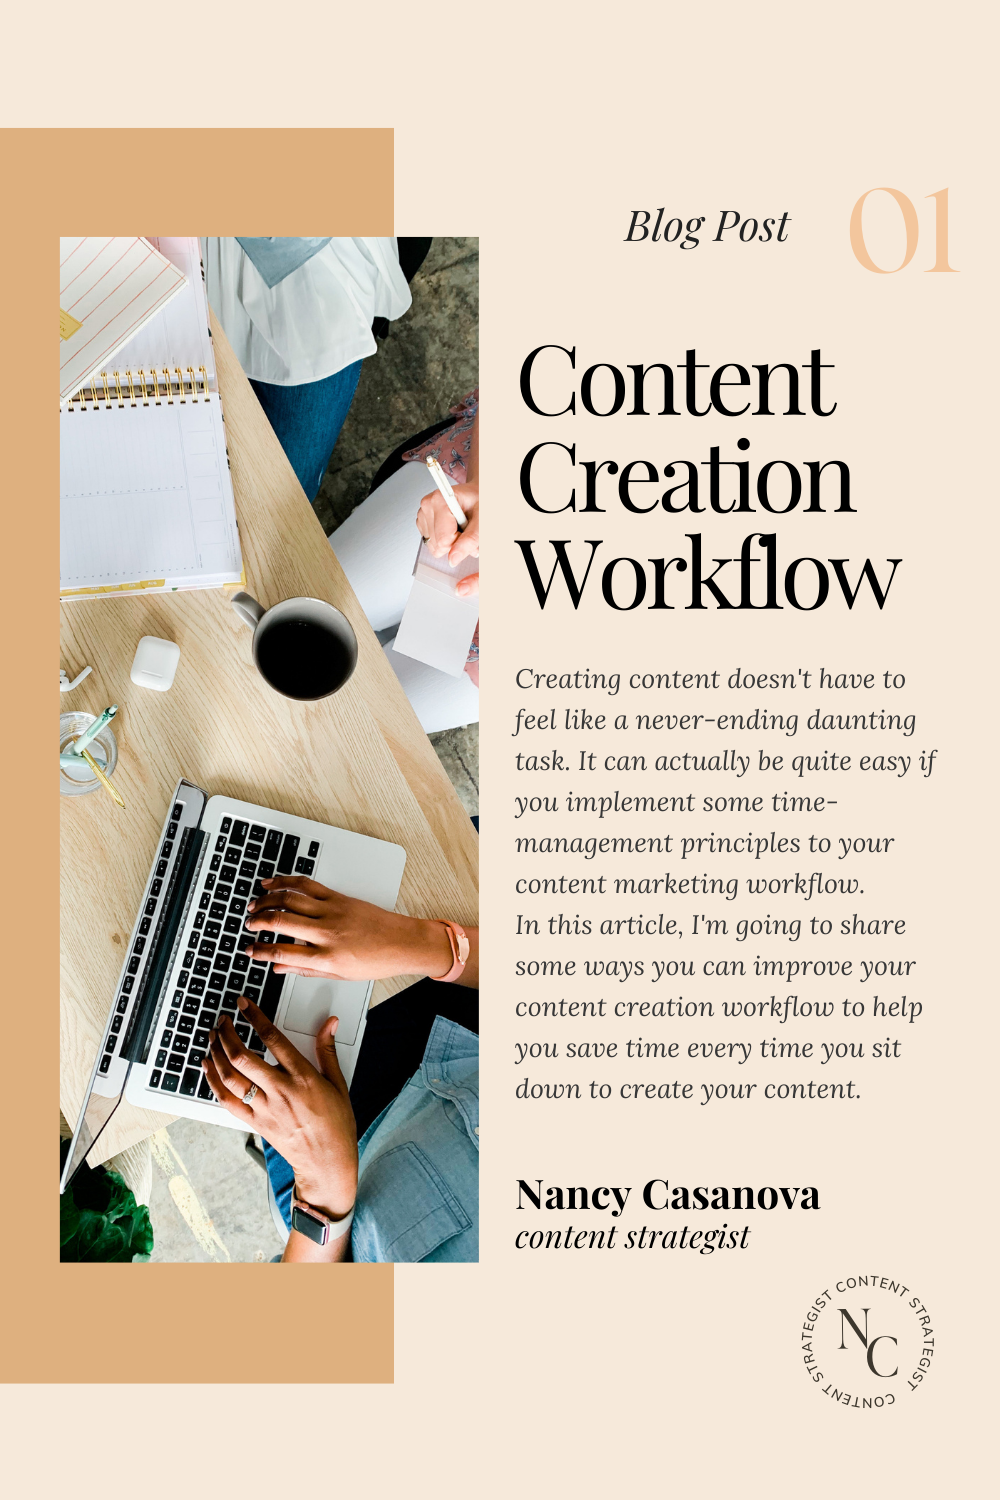 How to simplify your and streamline your content marketing workflow social media workflow hacks, content creation tips, content creation hacks, content creation system, create a simple system for content creation 